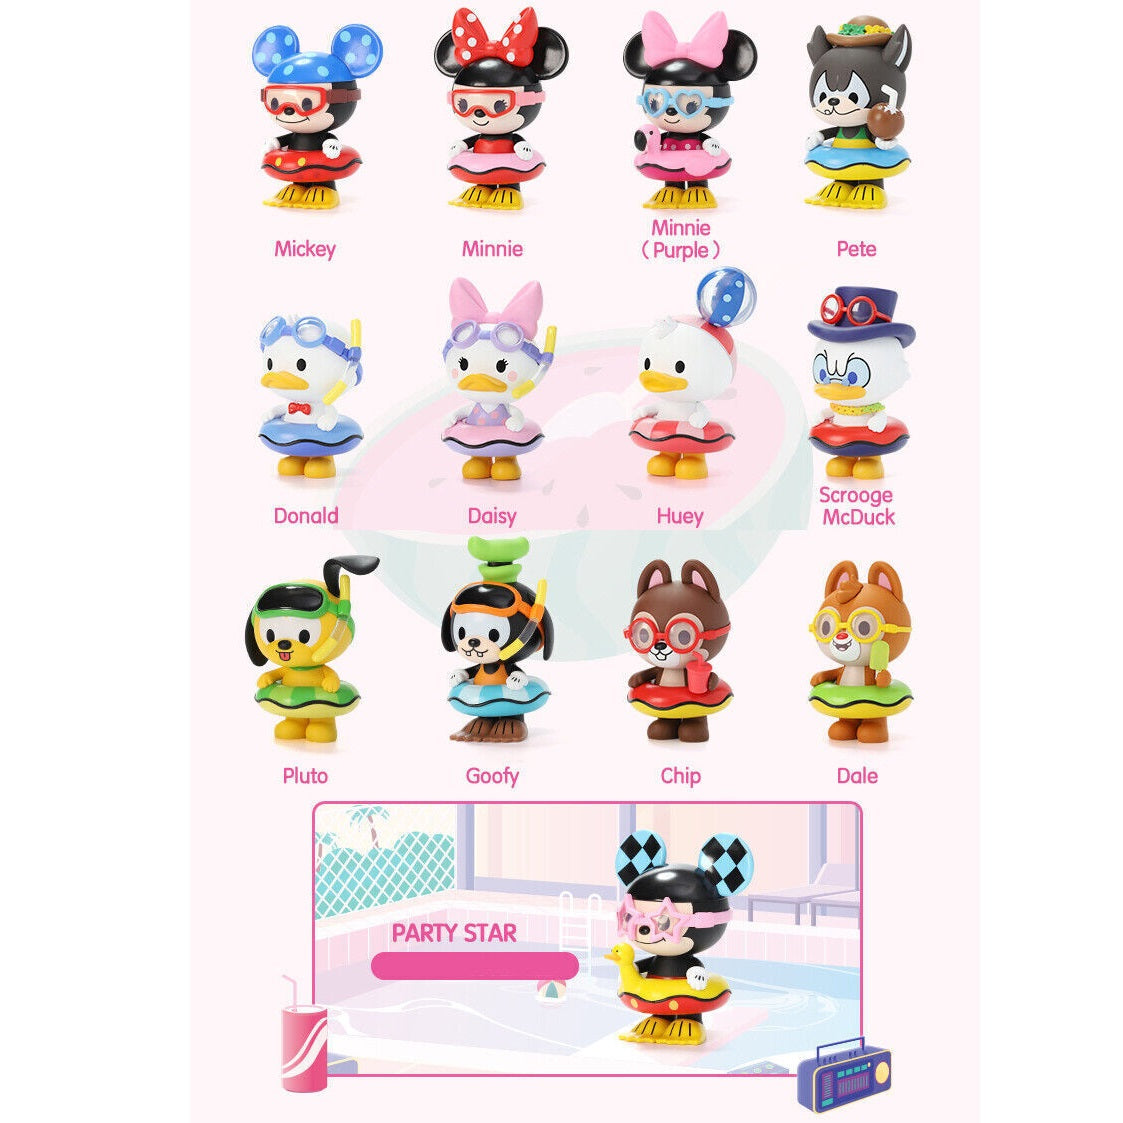 POP MART Disney Mickey Family Pool Party Series-Single Box (Random)-Pop Mart-Ace Cards & Collectibles